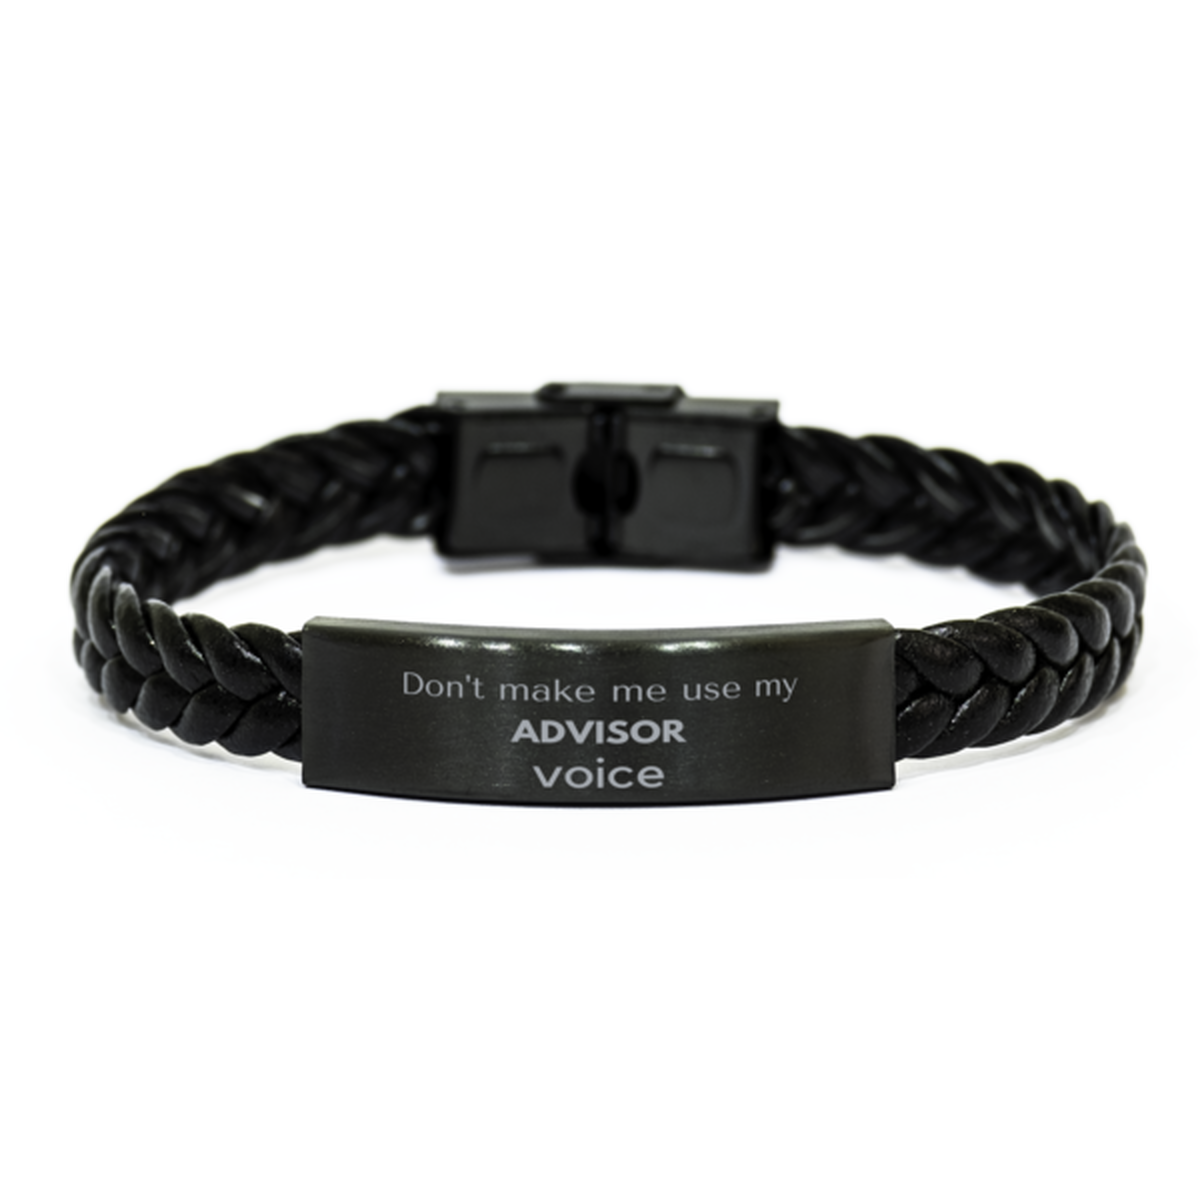 Don't make me use my Advisor voice, Sarcasm Advisor Gifts, Christmas Advisor Braided Leather Bracelet Birthday Unique Gifts For Advisor Coworkers, Men, Women, Colleague, Friends